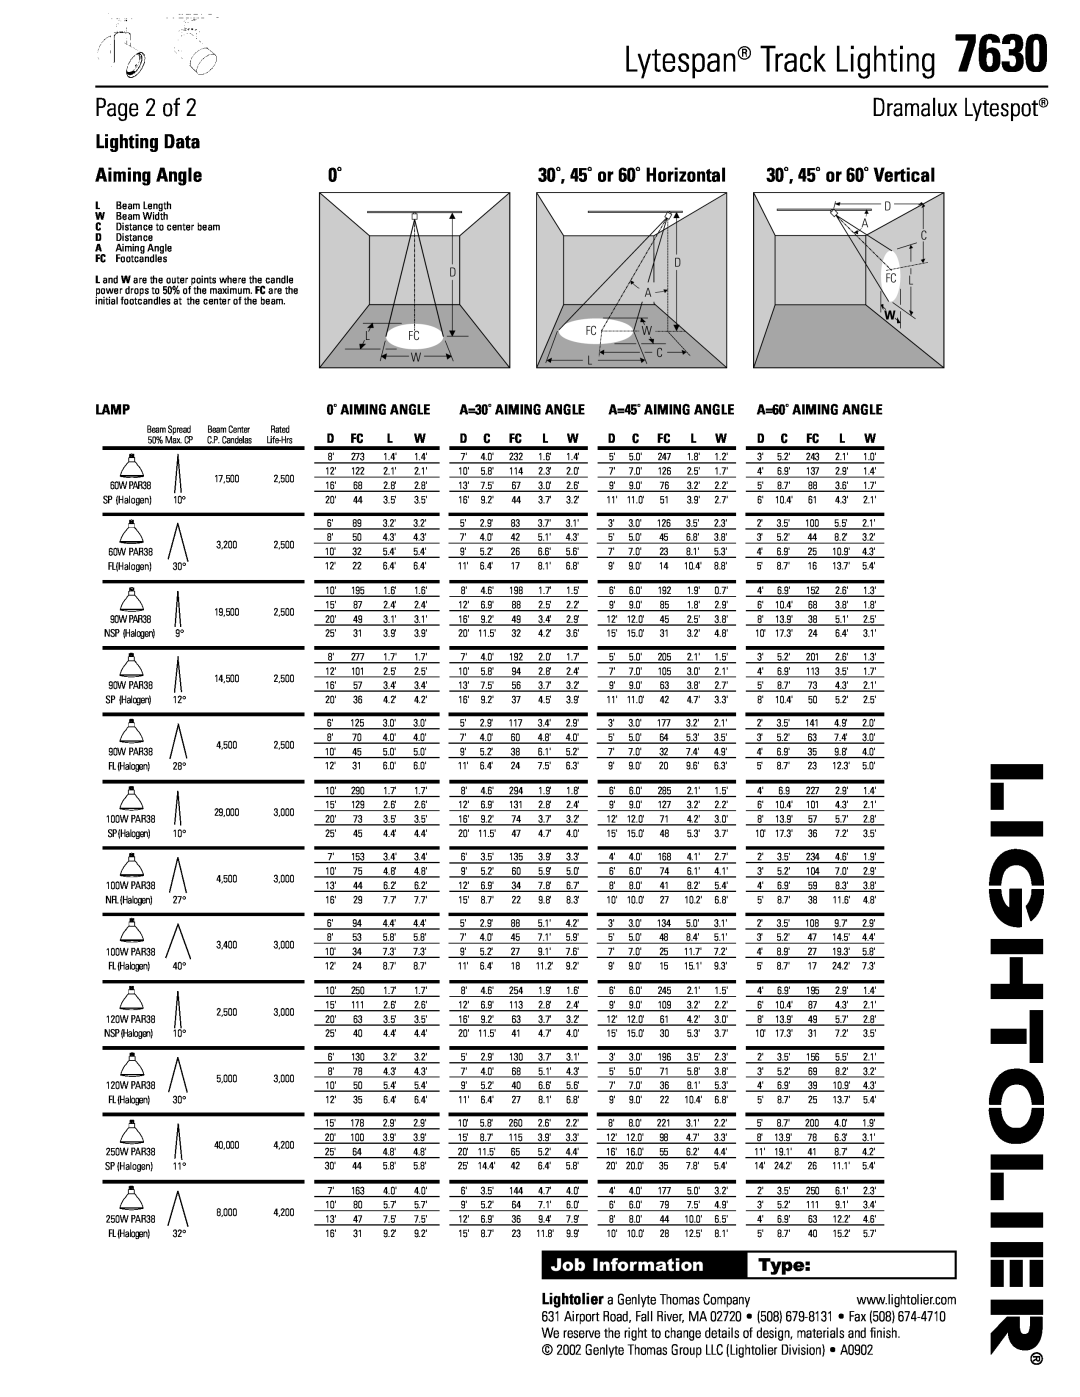 Lightolier 7630 specifications Page 2 of, Dramalux Lytespot, Lighting Data, Aiming Angle, 30˚, 45˚ or 60˚ Horizontal, Type 